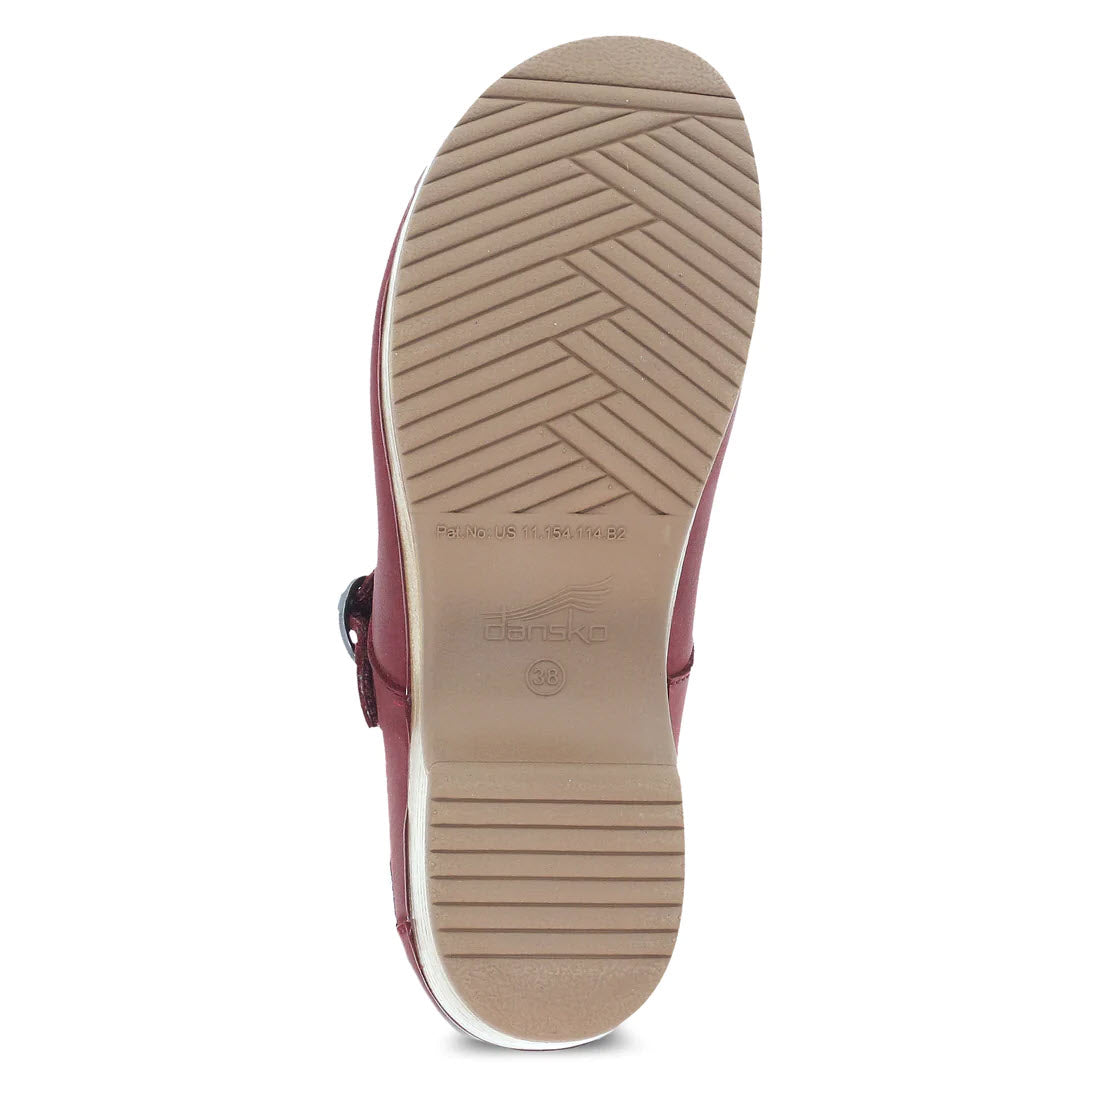 Bottom view of a single red Dansko Bria Cinnabar clog mule showing the textured beige sole with brand details and all-day support.